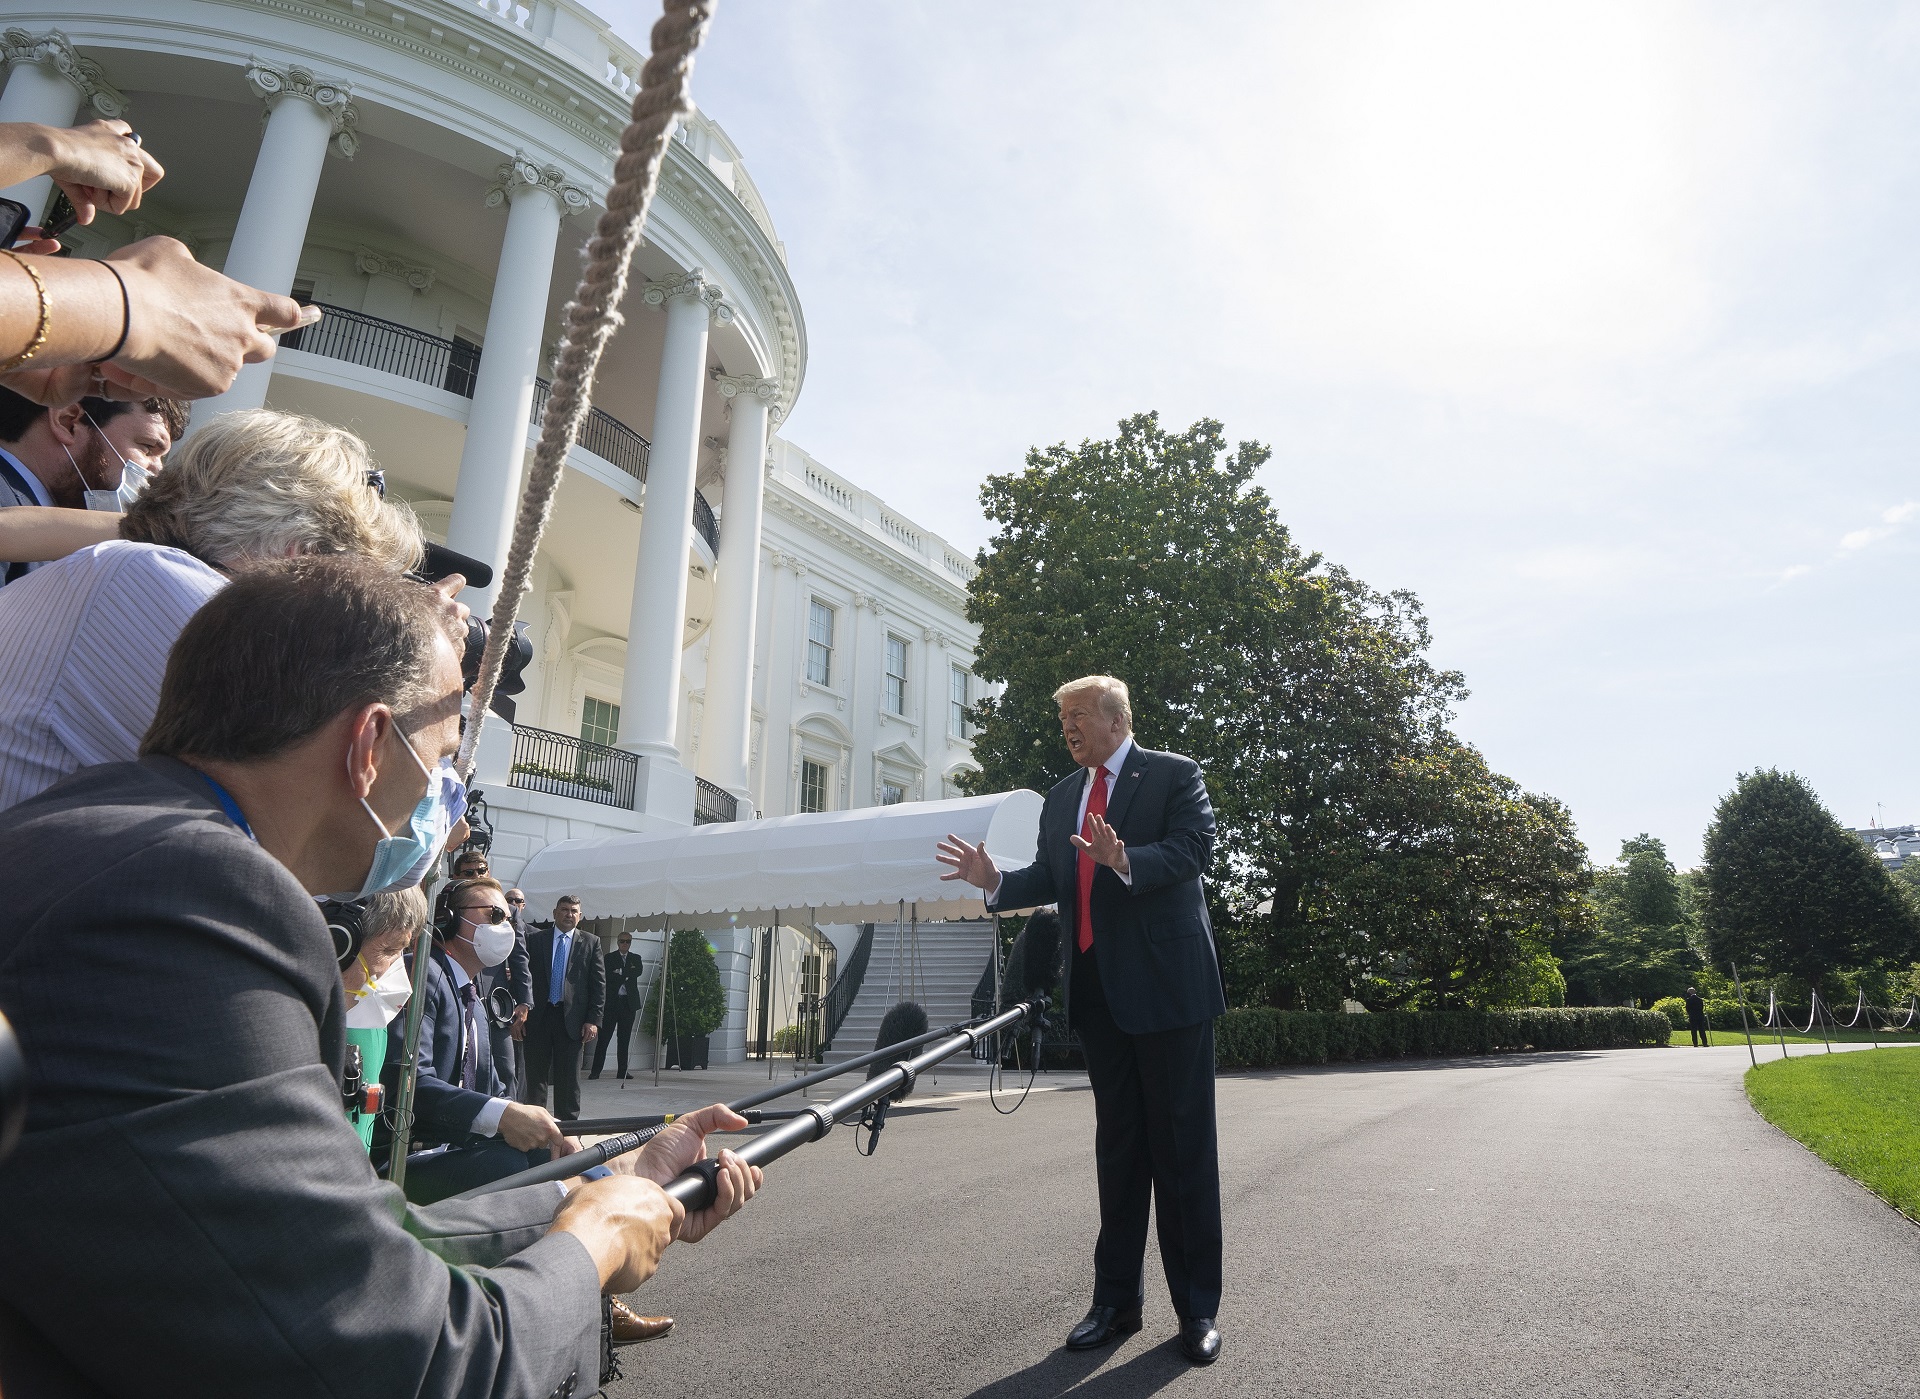 epa08503959 US President Donald J. Trump speaks to members of the media on the South Lawn of the White House in Washington, DC, USA, 23 June 2020, as he departs for Yuma, Arizona. Trump stated that he authorized the Federal government to arrest any demonstrator caught vandalizing US monuments, with a punishment of up to 10 years in prison.  EPA/Stefani Reynolds / POOL